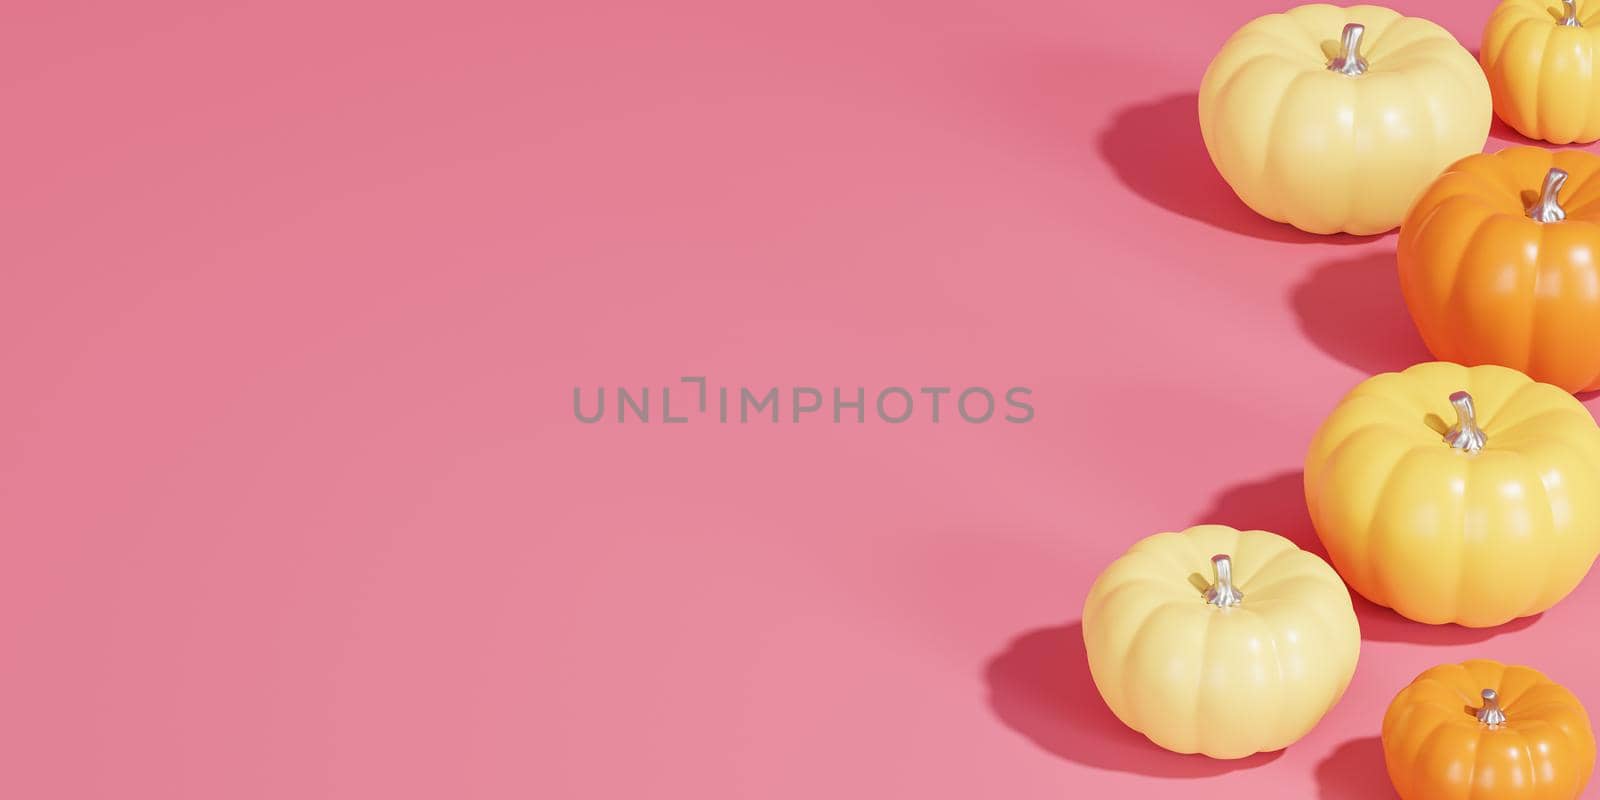 Pumpkins on pink minimal background for advertising on autumn holidays or sales, copy space, 3d render banner